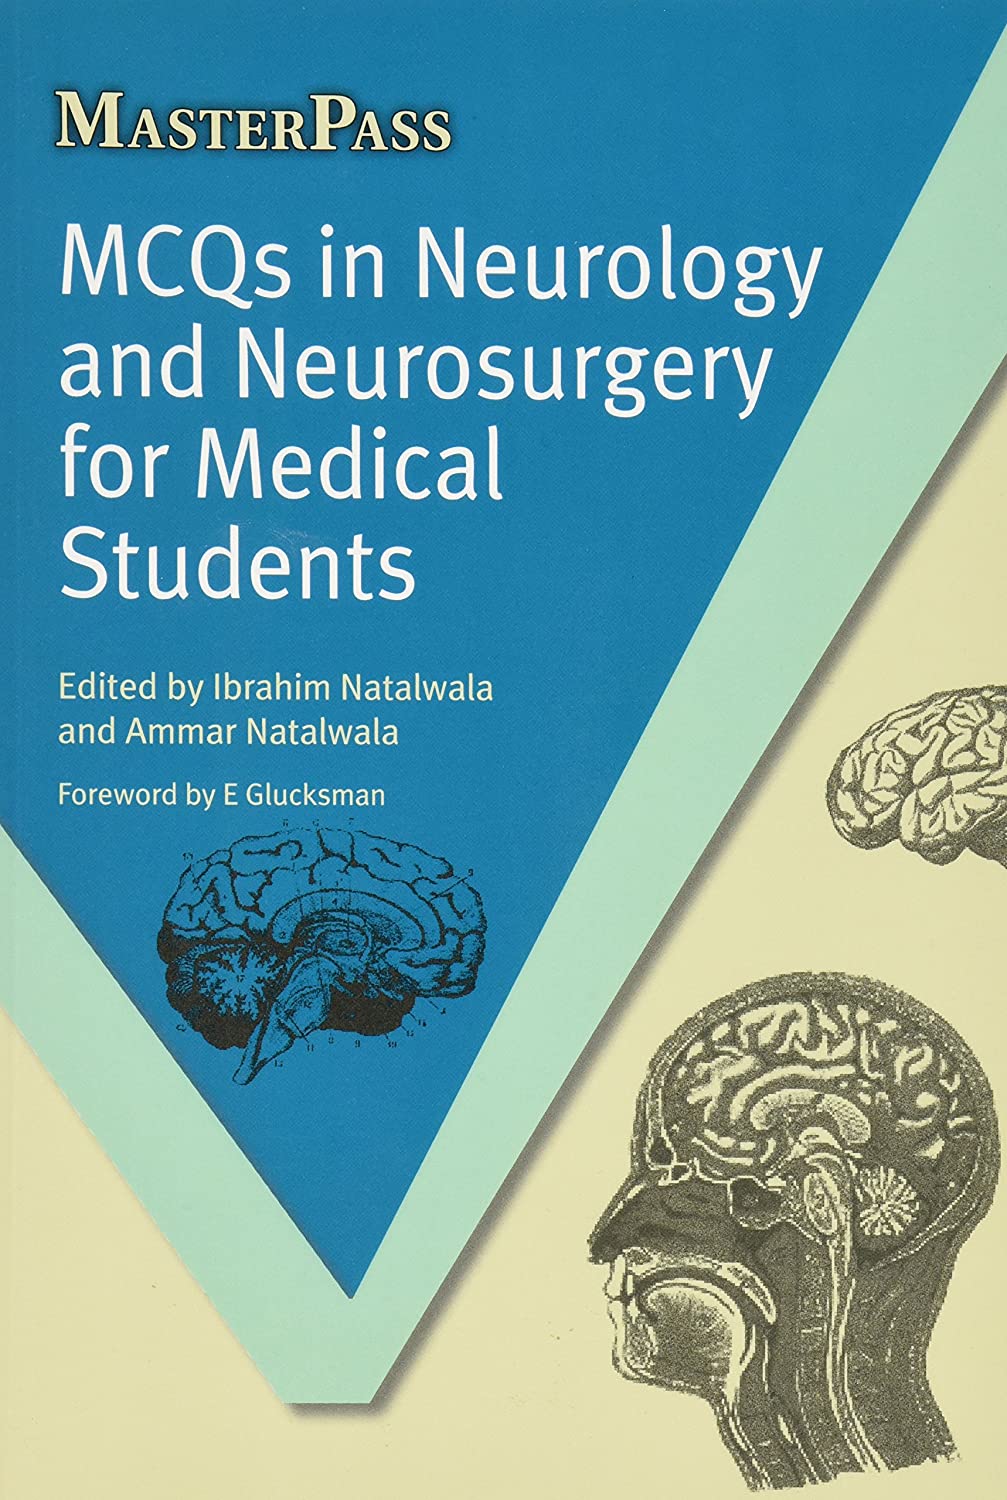 https://pickpdfs.com/masterpass-mcqs-in-neurology-and-neurosurgery-for-medical-students-first-edition-1e-pdf-download-pickpdfs/